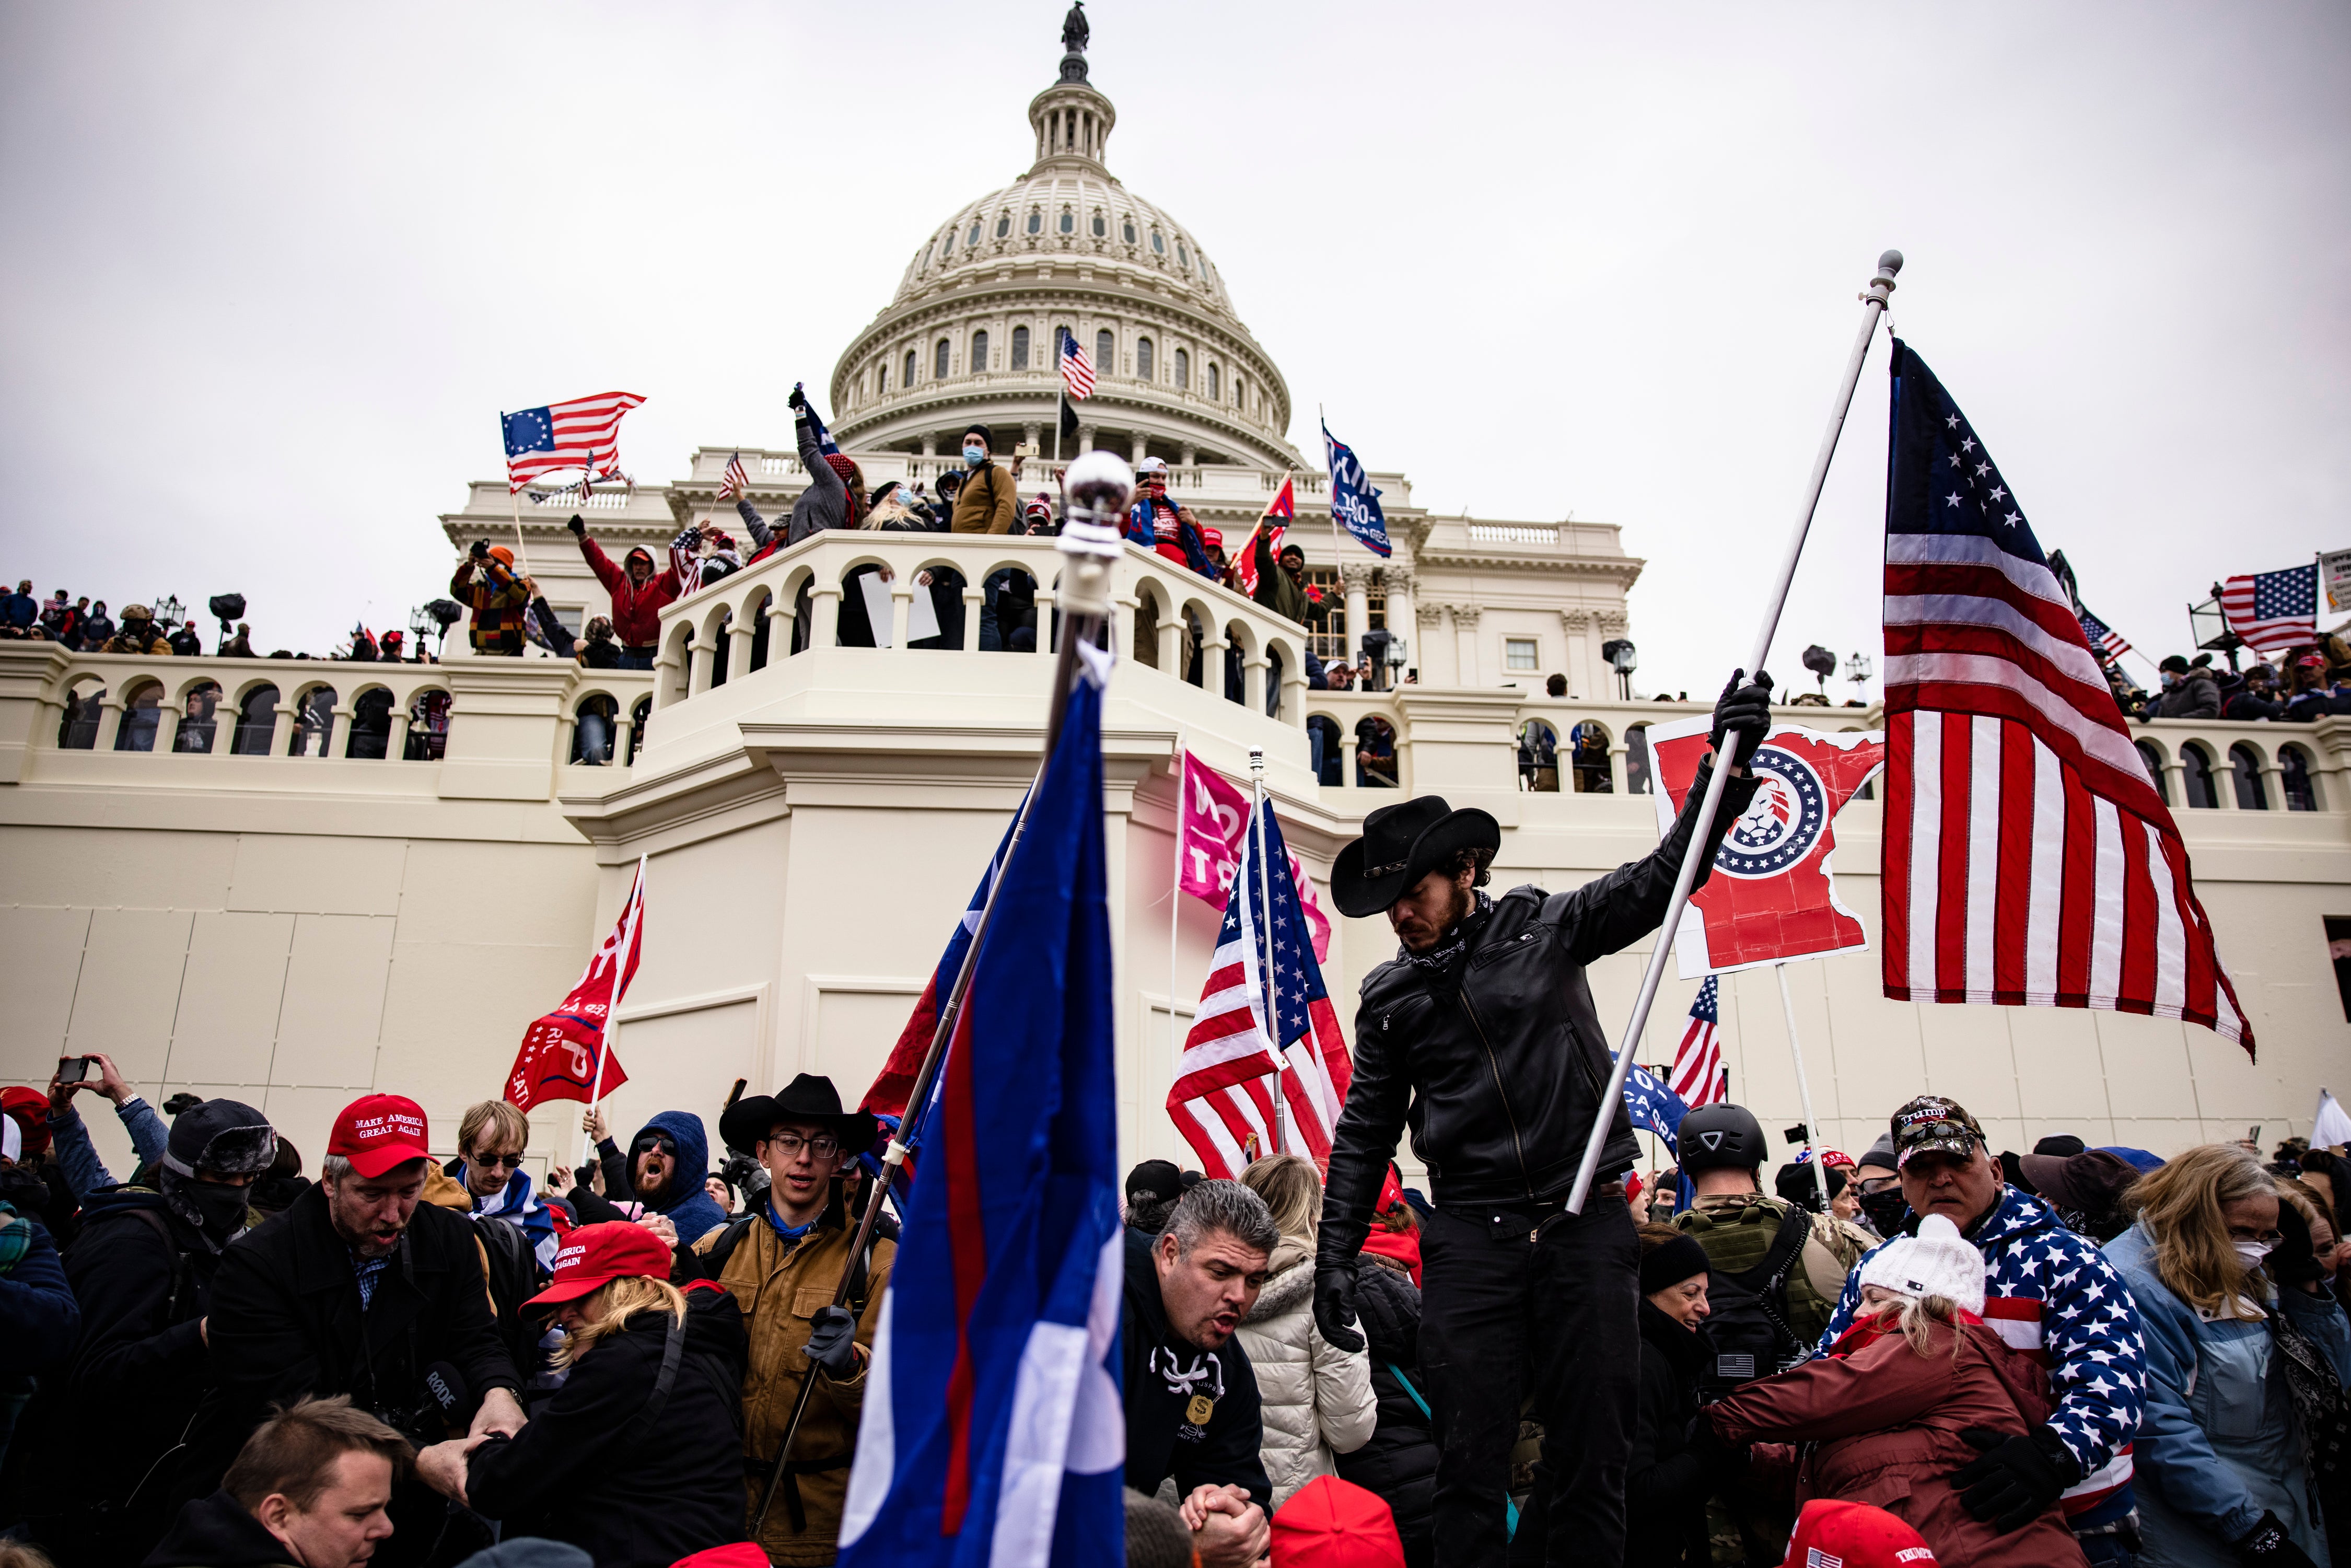 Insurrection day: pro-Trump supporters storm the U.S. Capitol on 6 January 2021